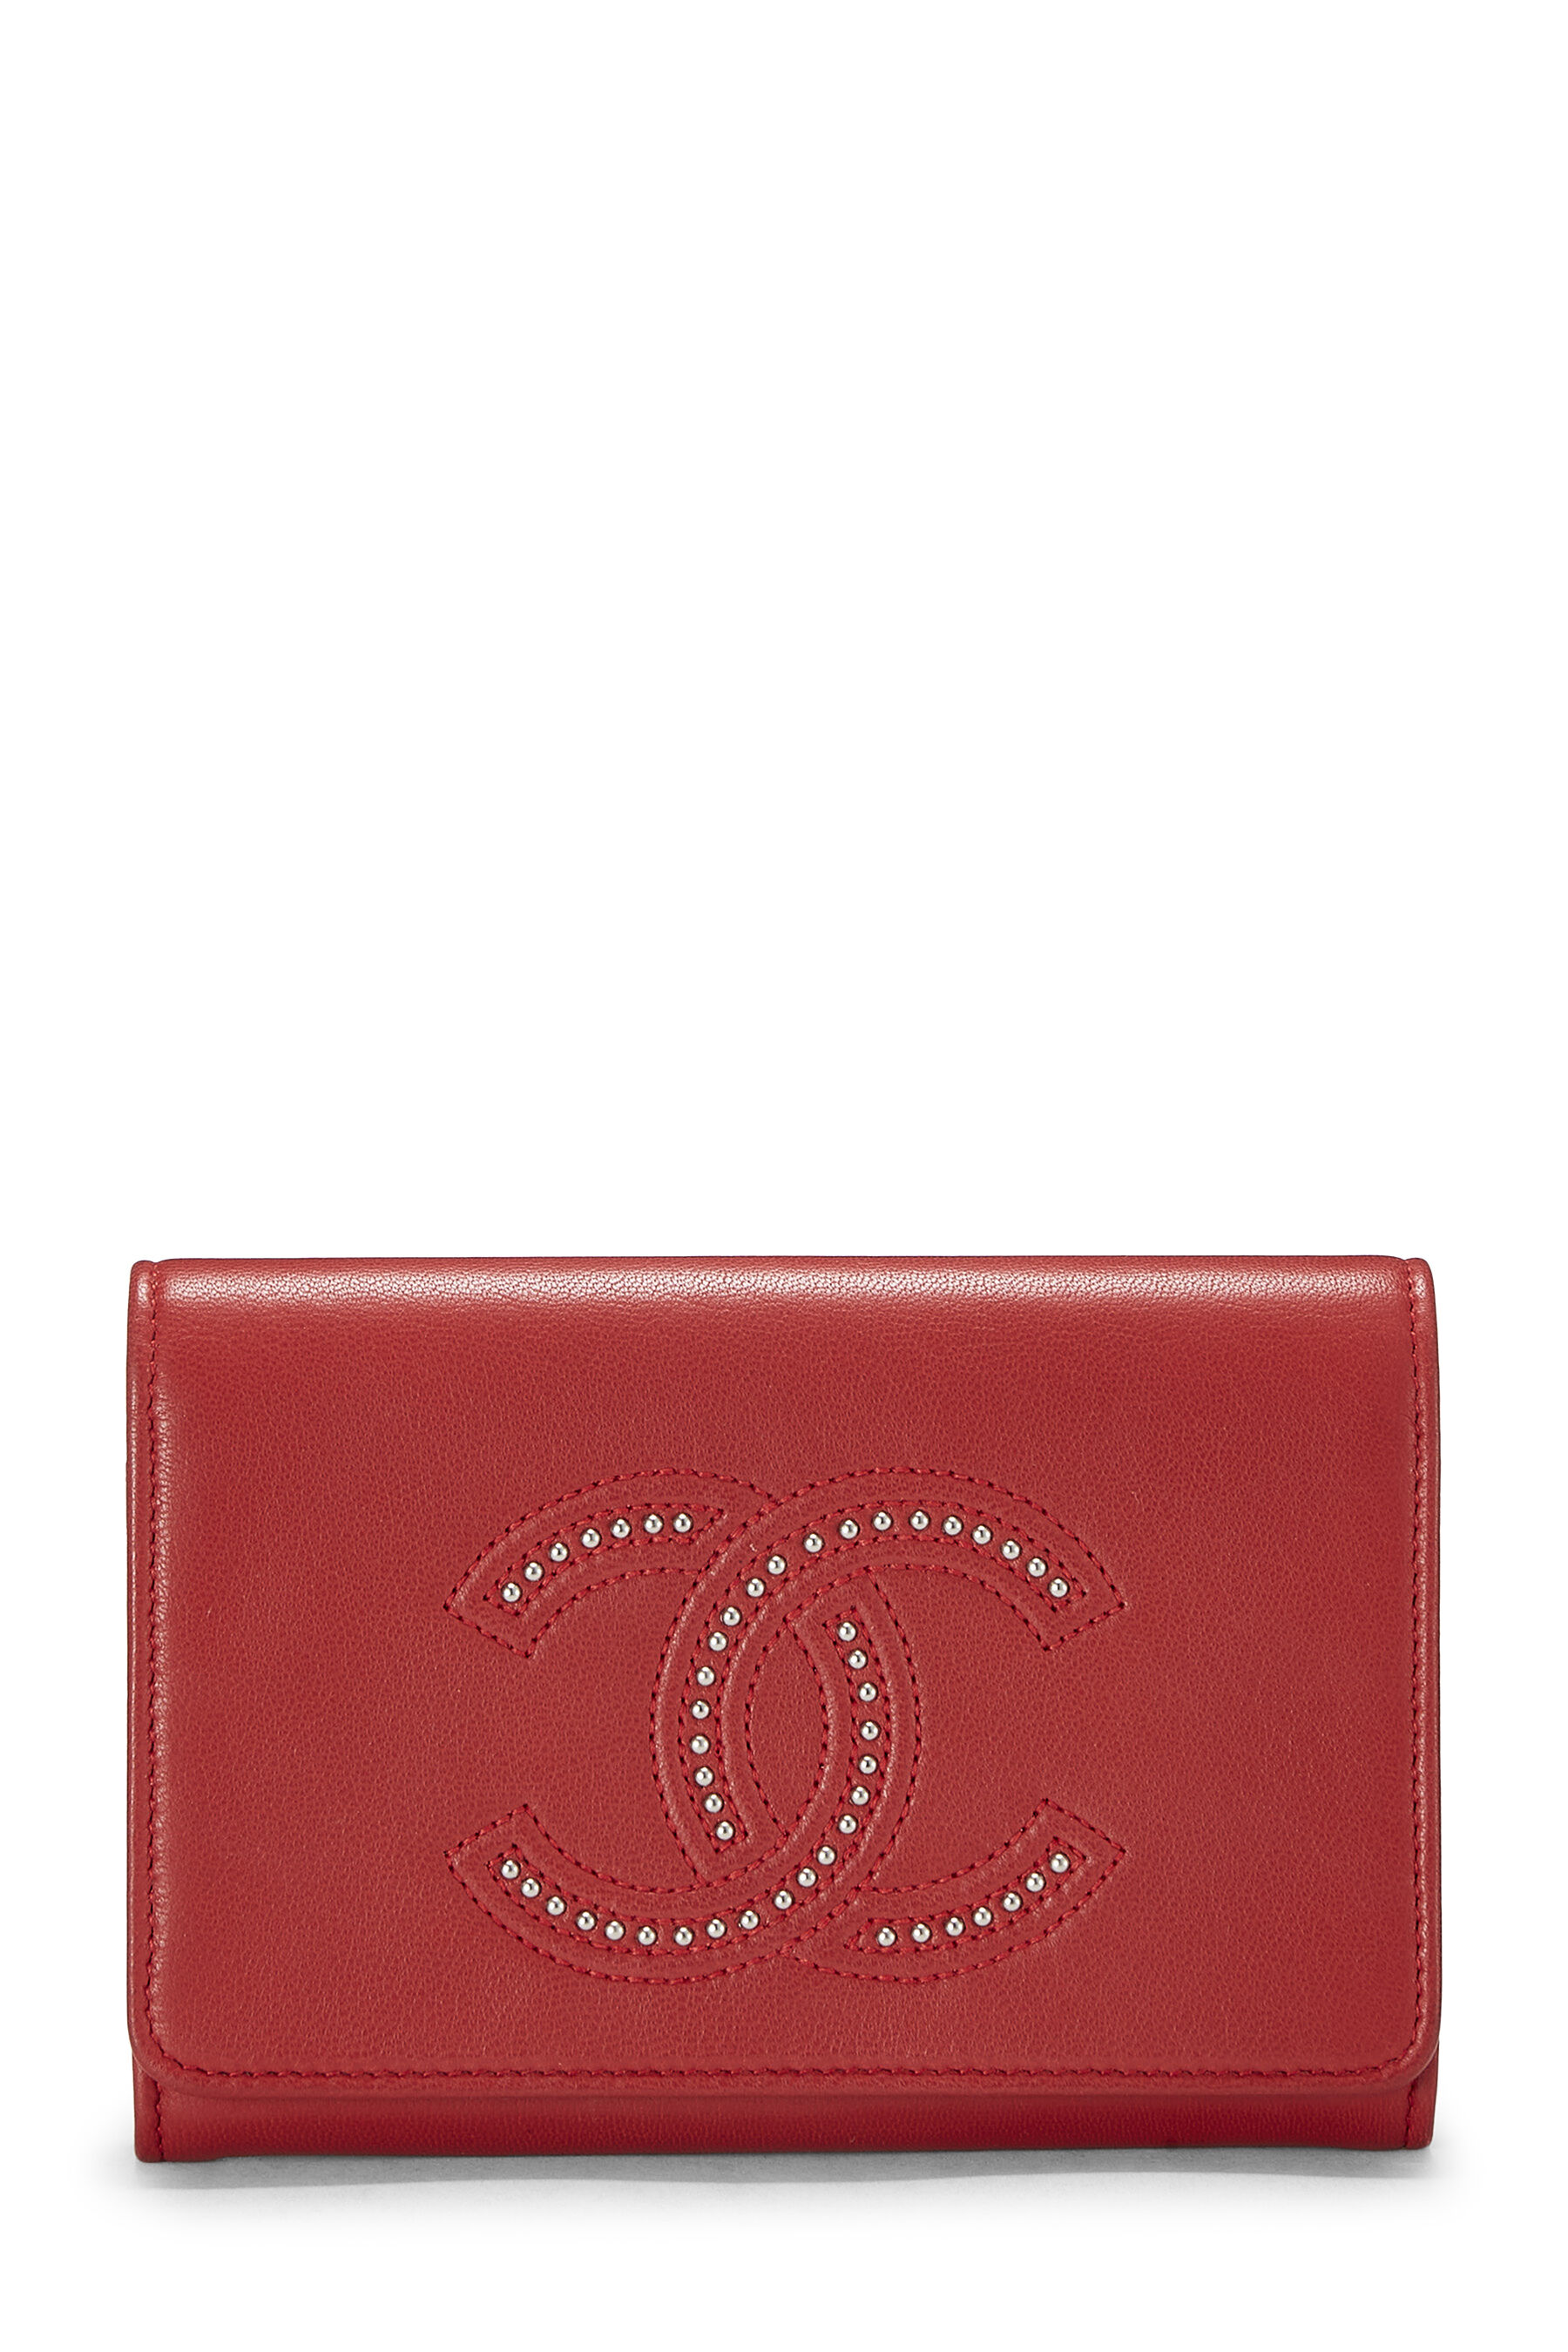 Chanel - Red Quilted Lambskin Flap Wallet